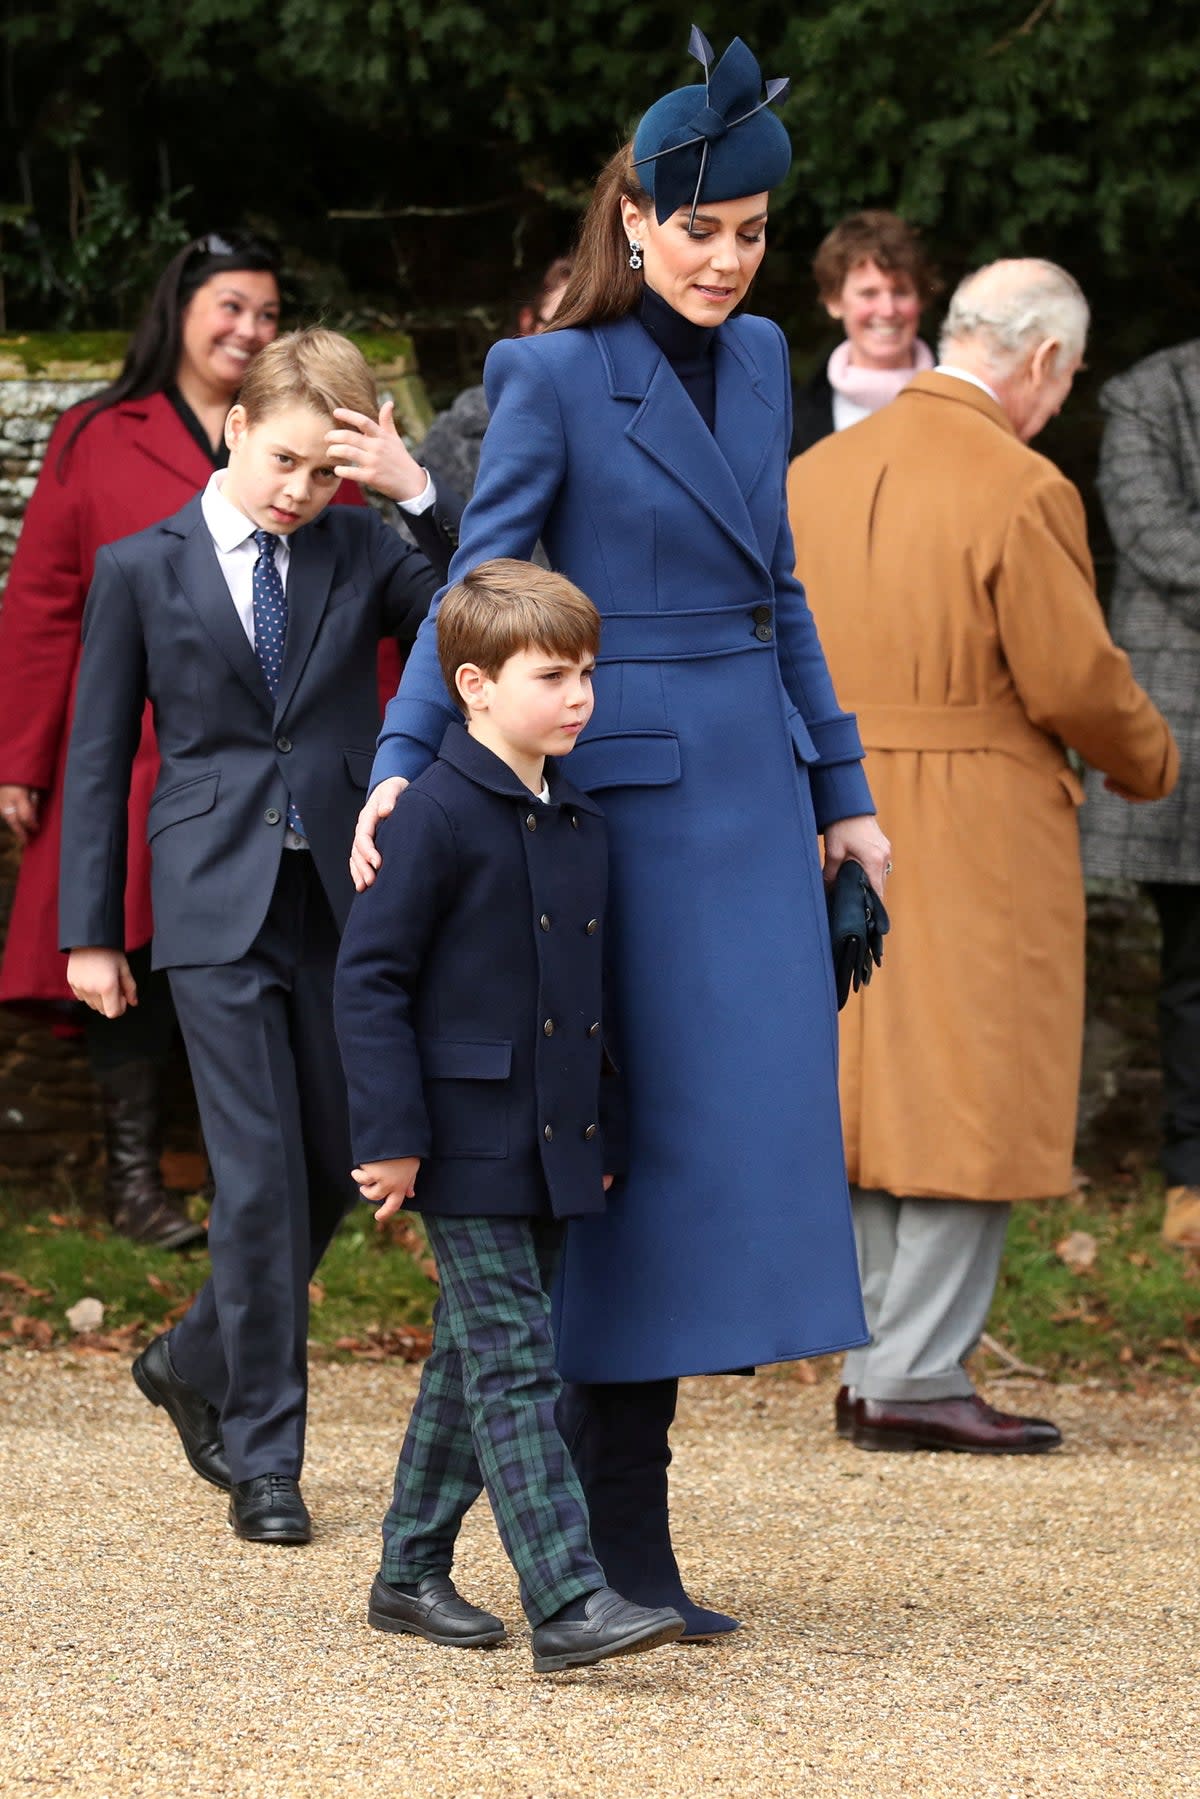 Kate and Louis were last reliably photographed together in December (REUTERS)